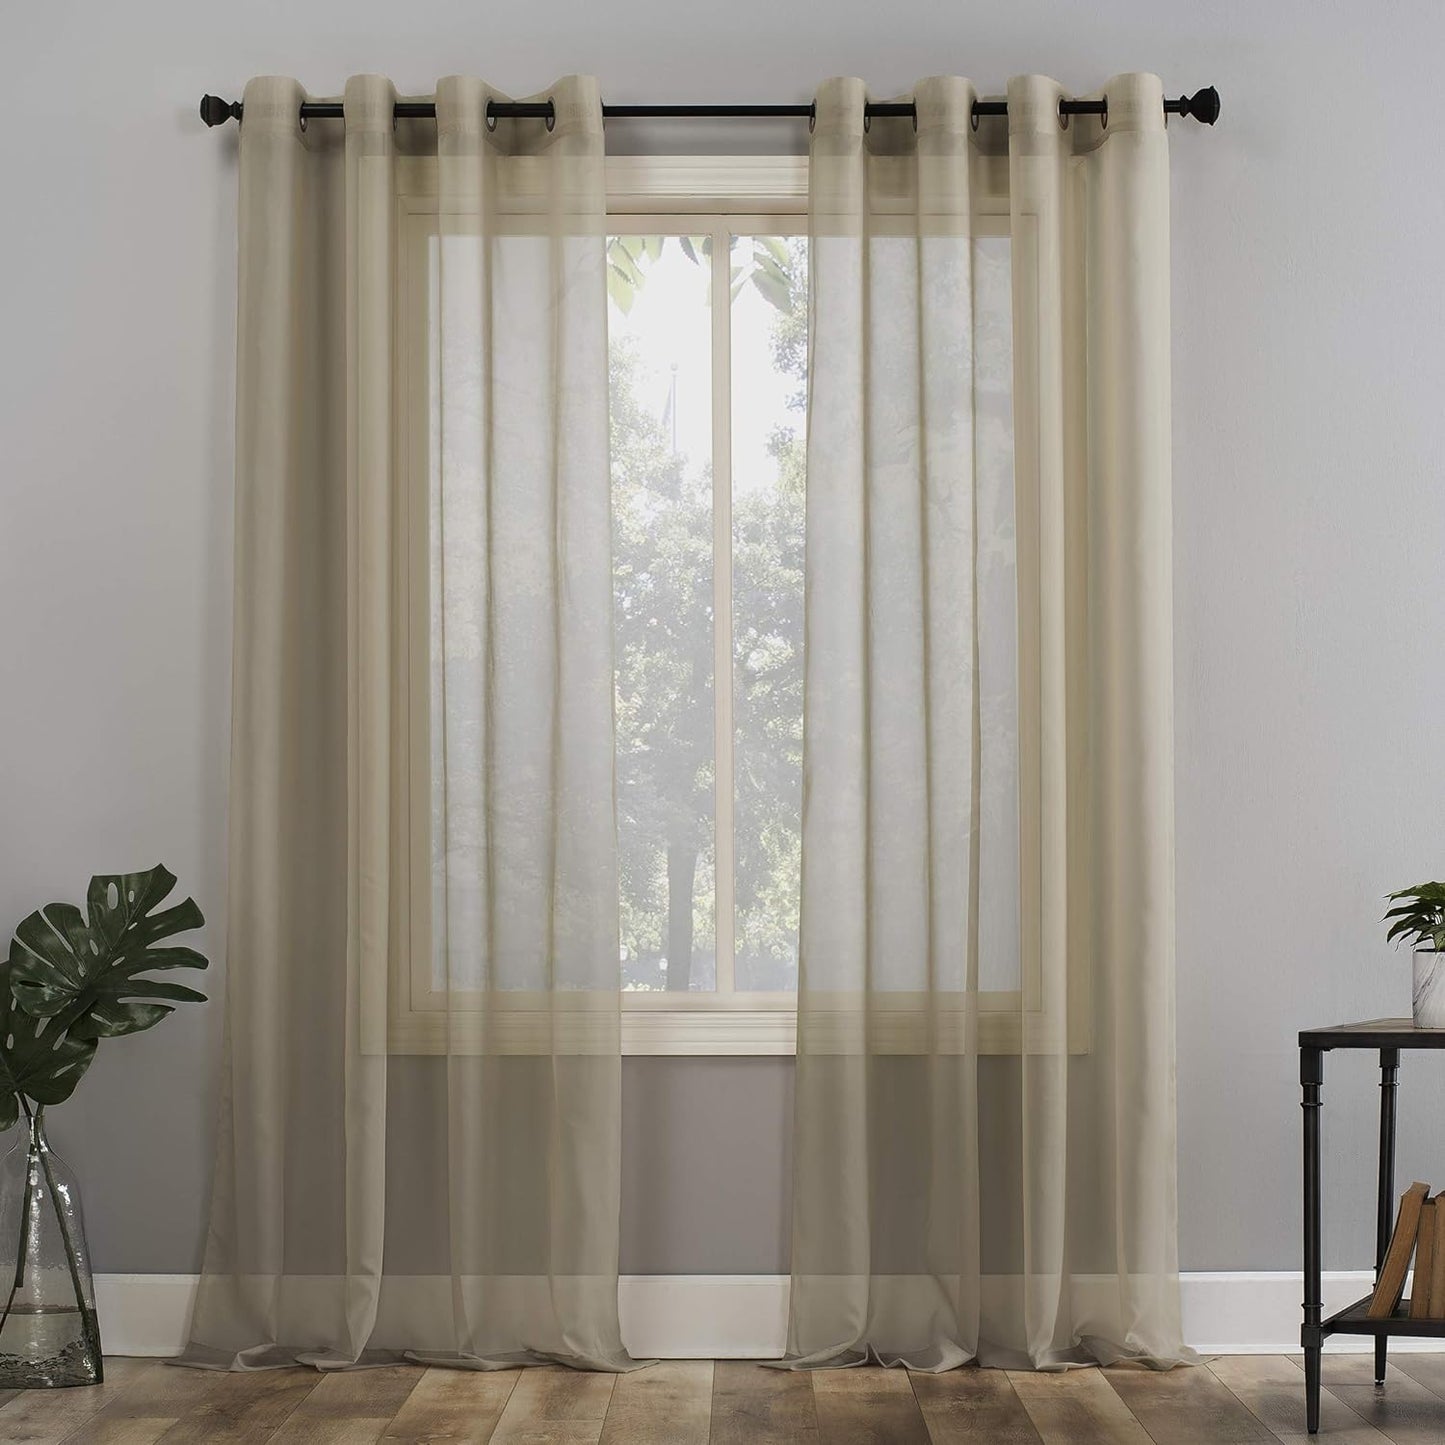 No. 918 Emily Sheer Voile Grommet Curtain Panel, 59" X 95", White  No. 918 Stone Curtain Panel 59" X 95"